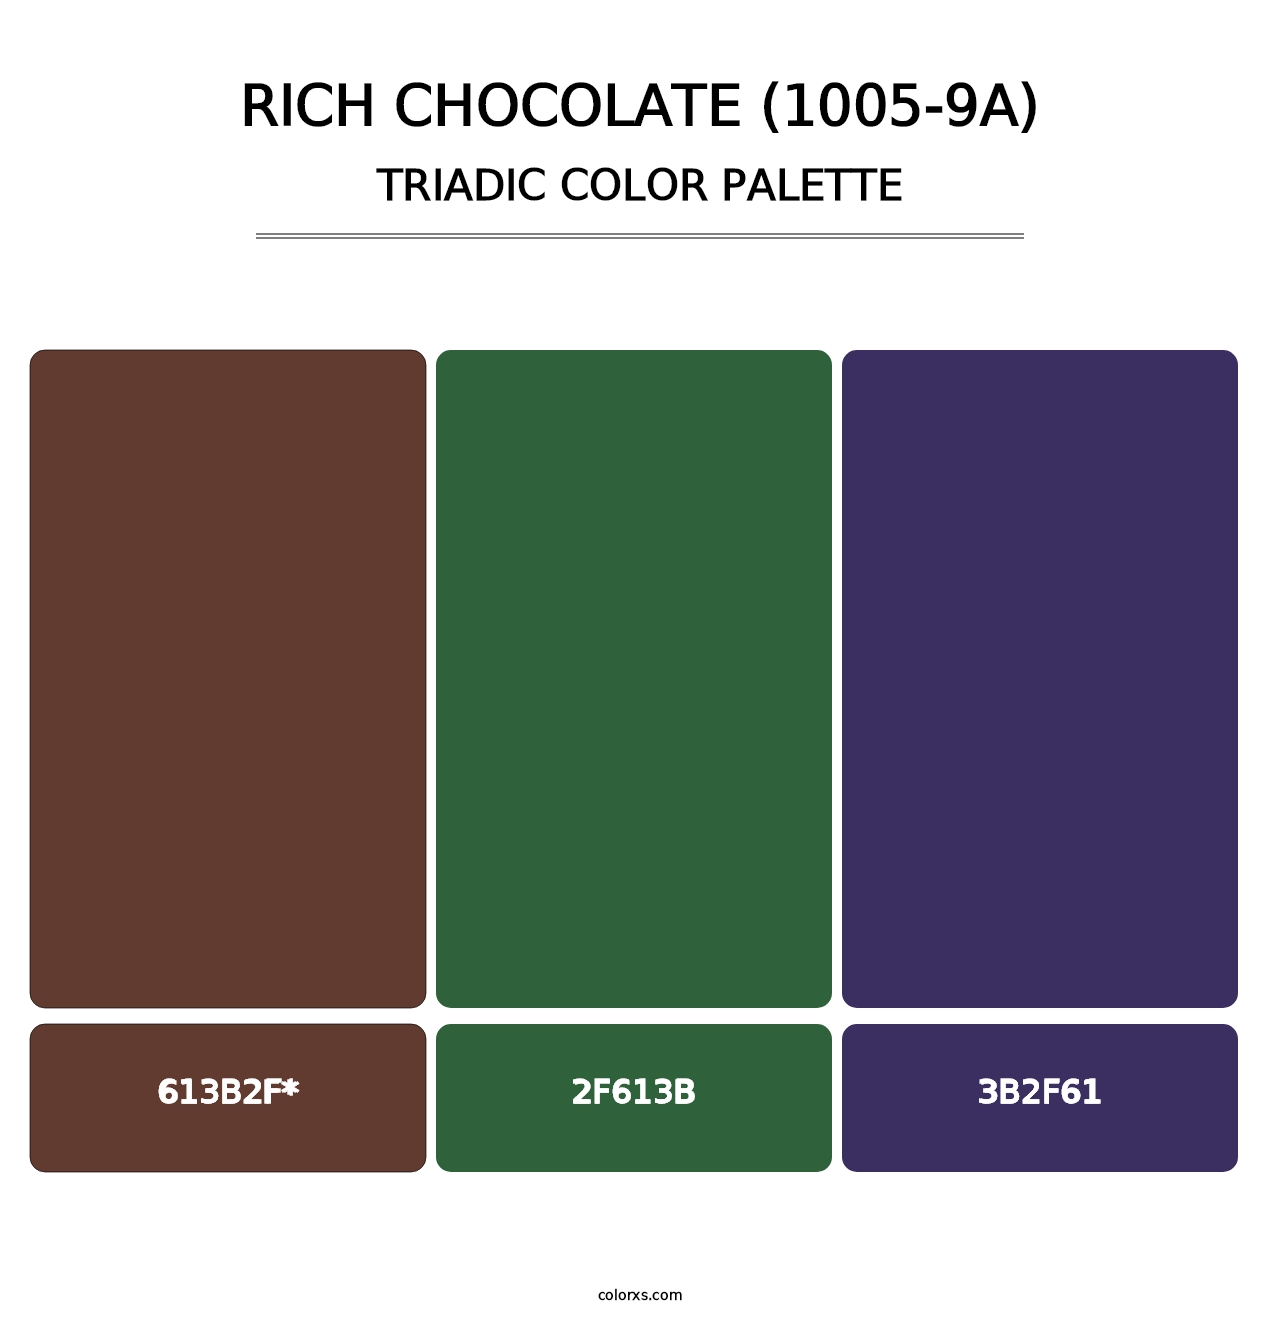 Rich Chocolate (1005-9A) - Triadic Color Palette